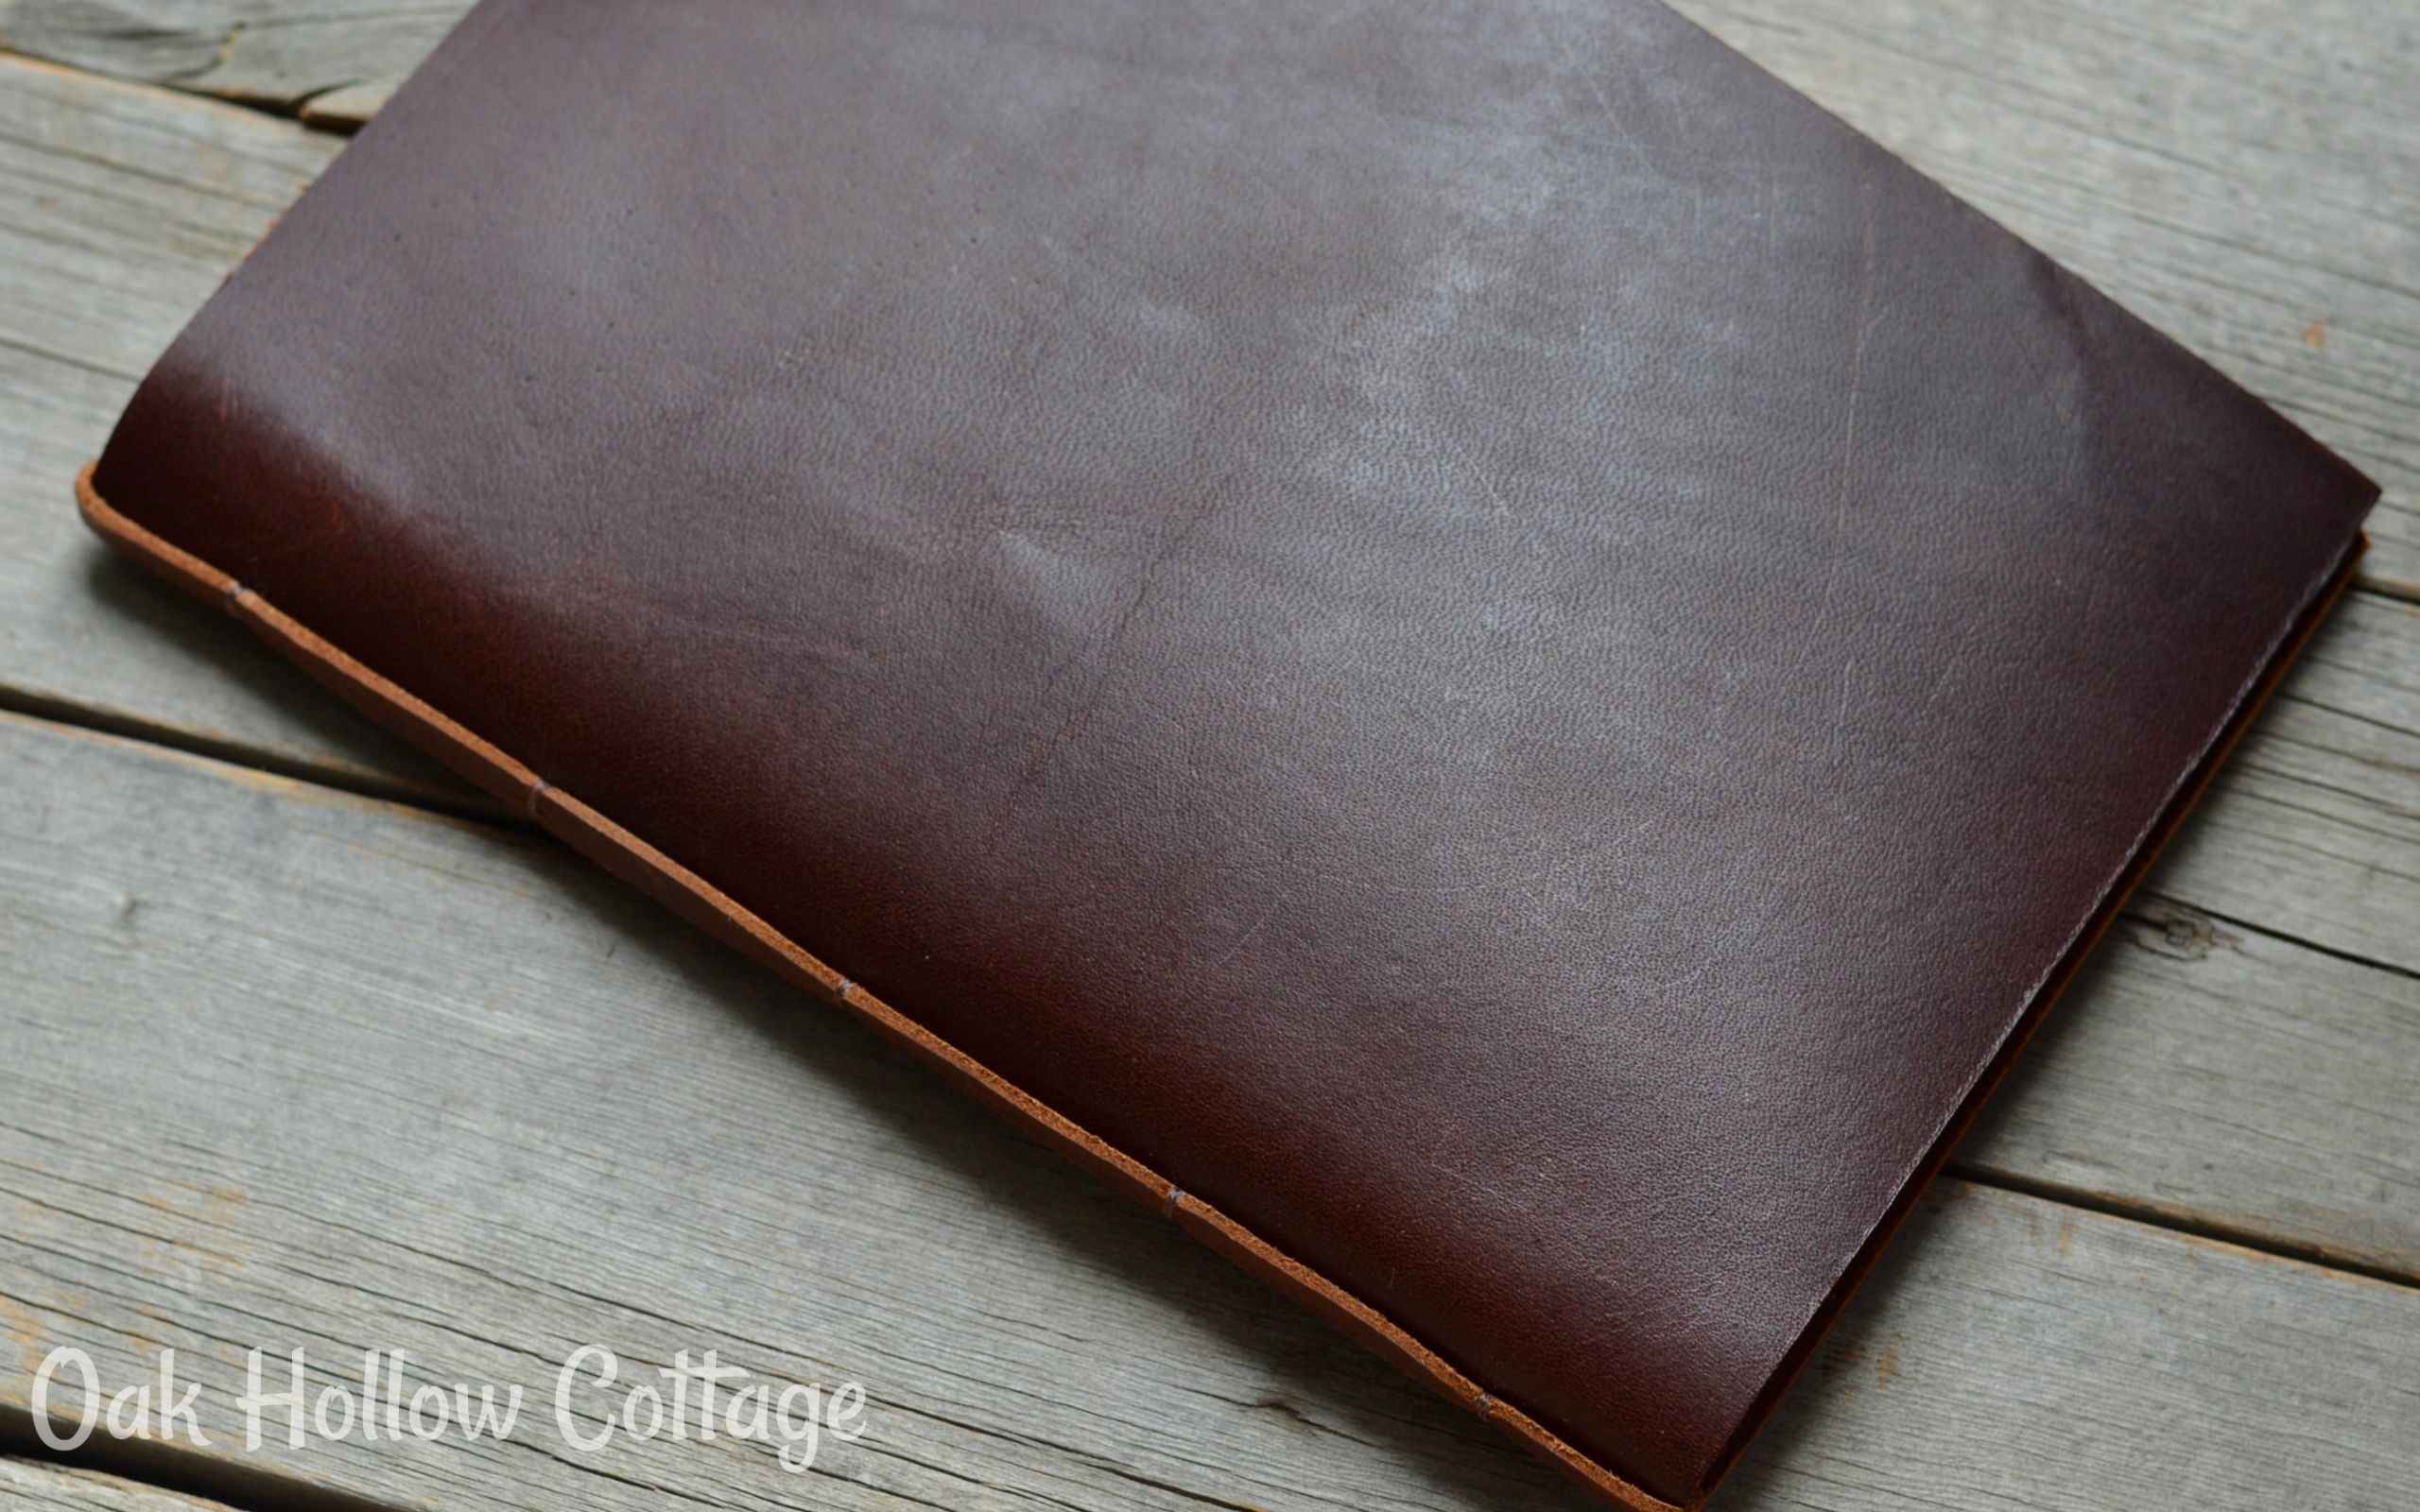 Handmade leather journals make great gifts. Christmas, birthdays, graduation, just for fun. Go to ouradventuringfamily.com to find handmade, leather-bound travel journals and nature journals. 